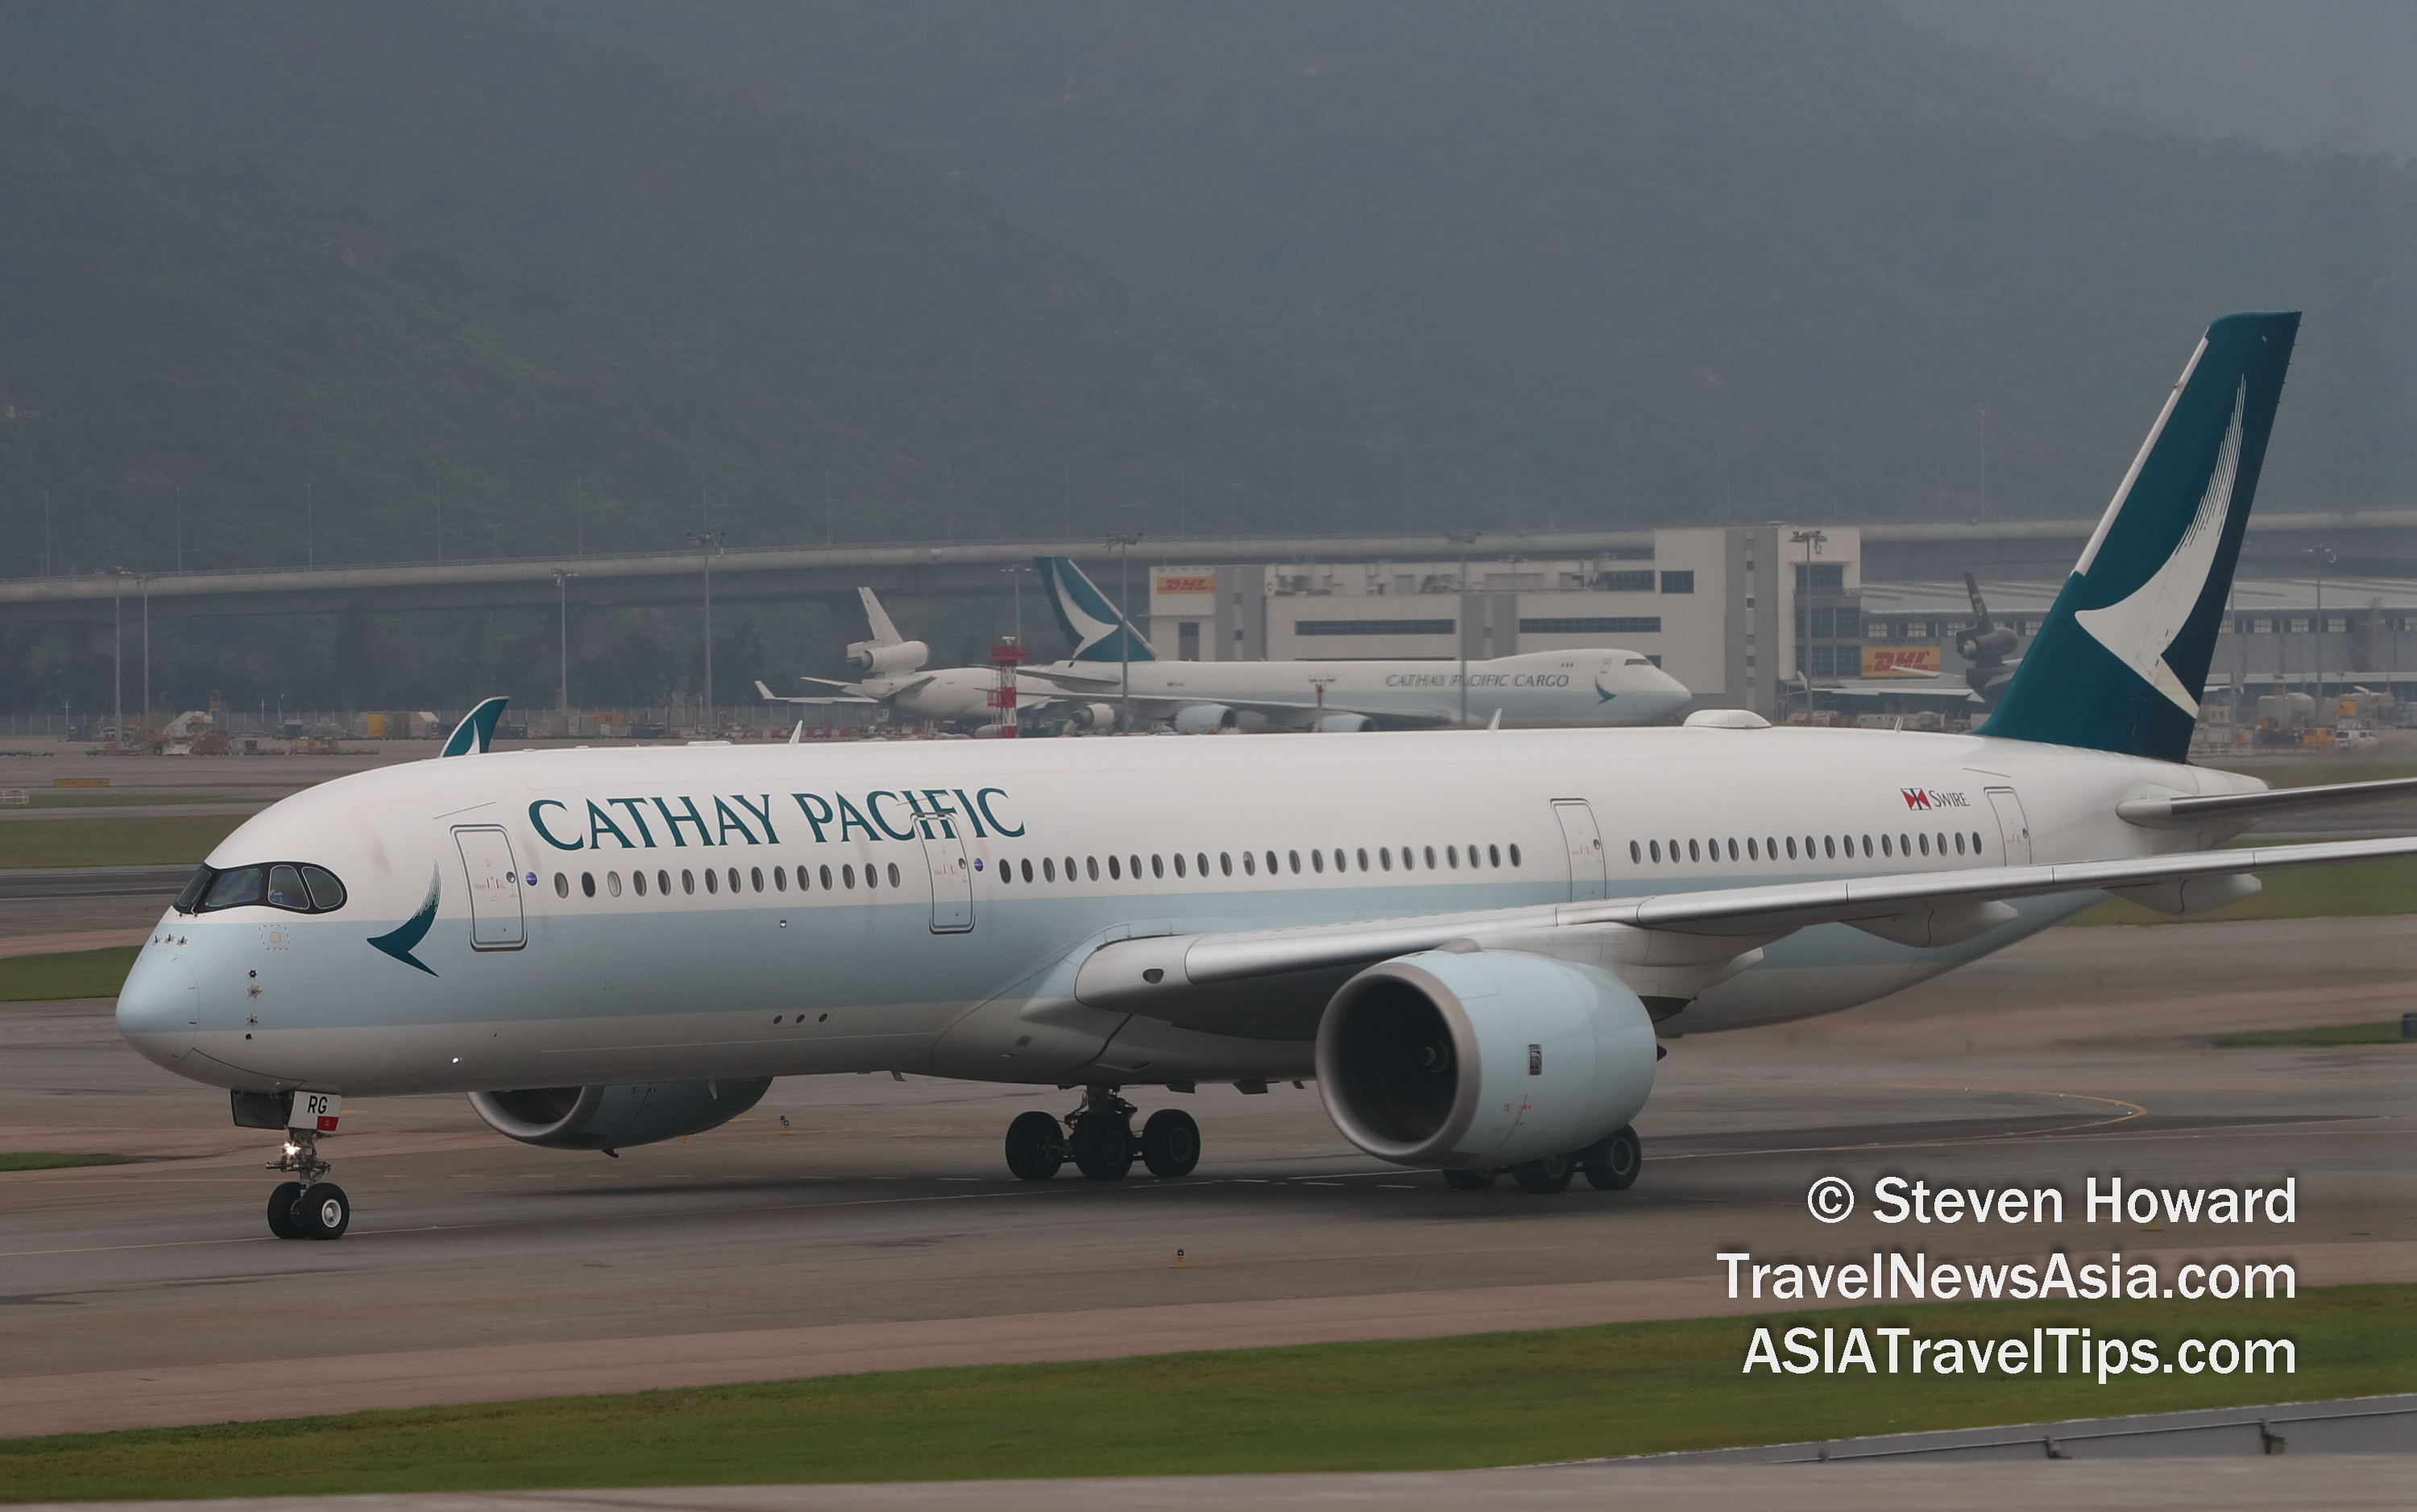 Cathay Pacific cargo and passenger aircraft at HKIA in April 2019. Picture by Steven Howard of TravelNewsAsia.com Click to enlarge.